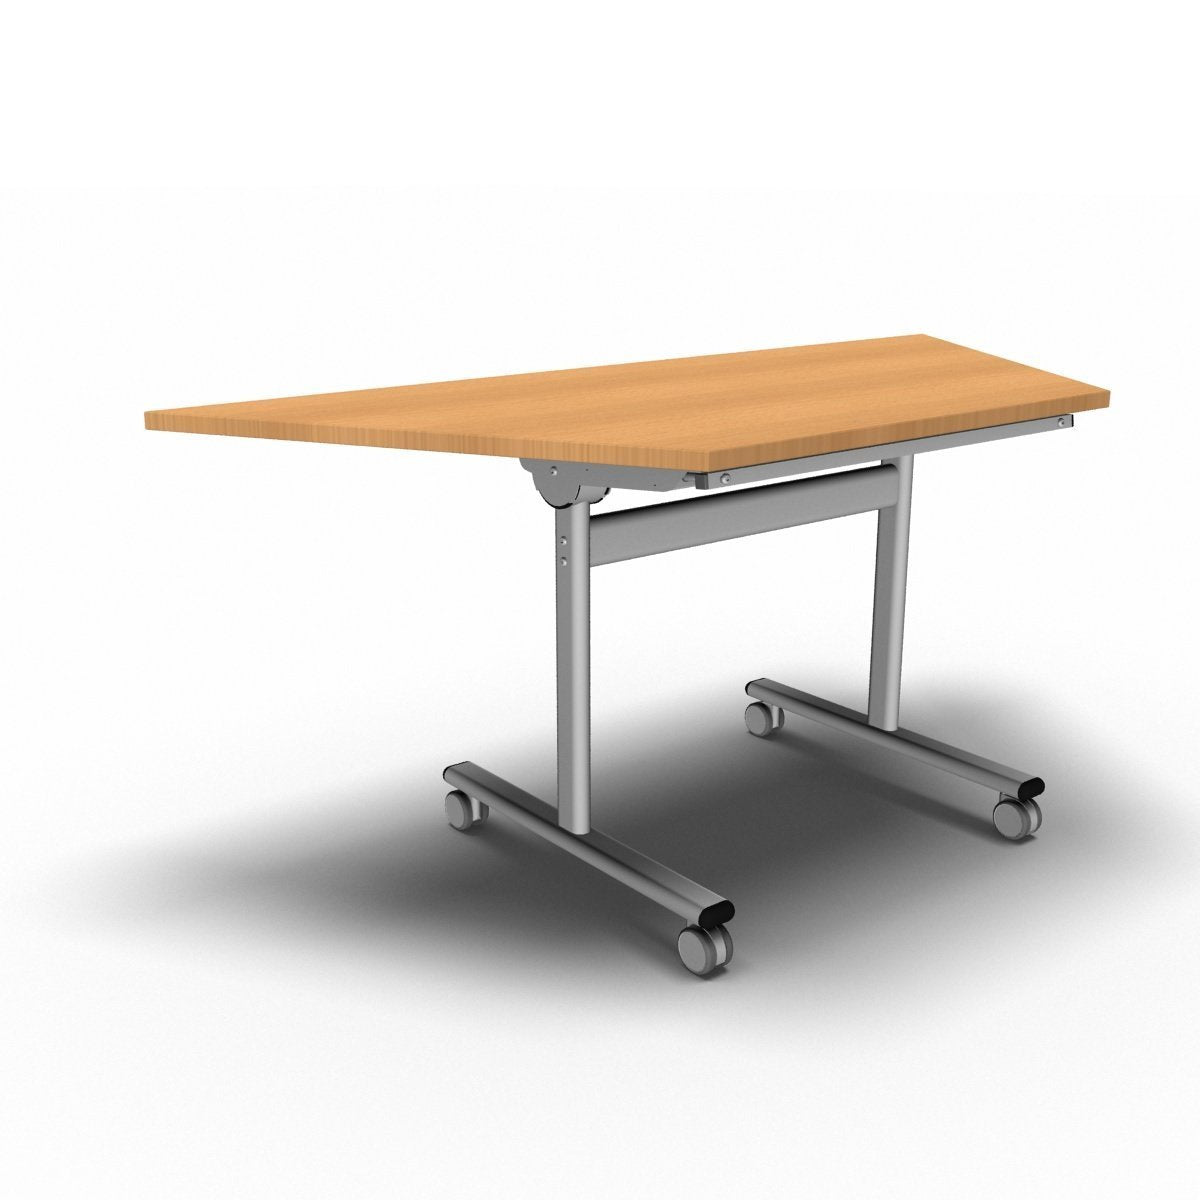 Table 1600 x 800 x 720mm / Trapezoidal / Beech Synergy Flip Top Tables